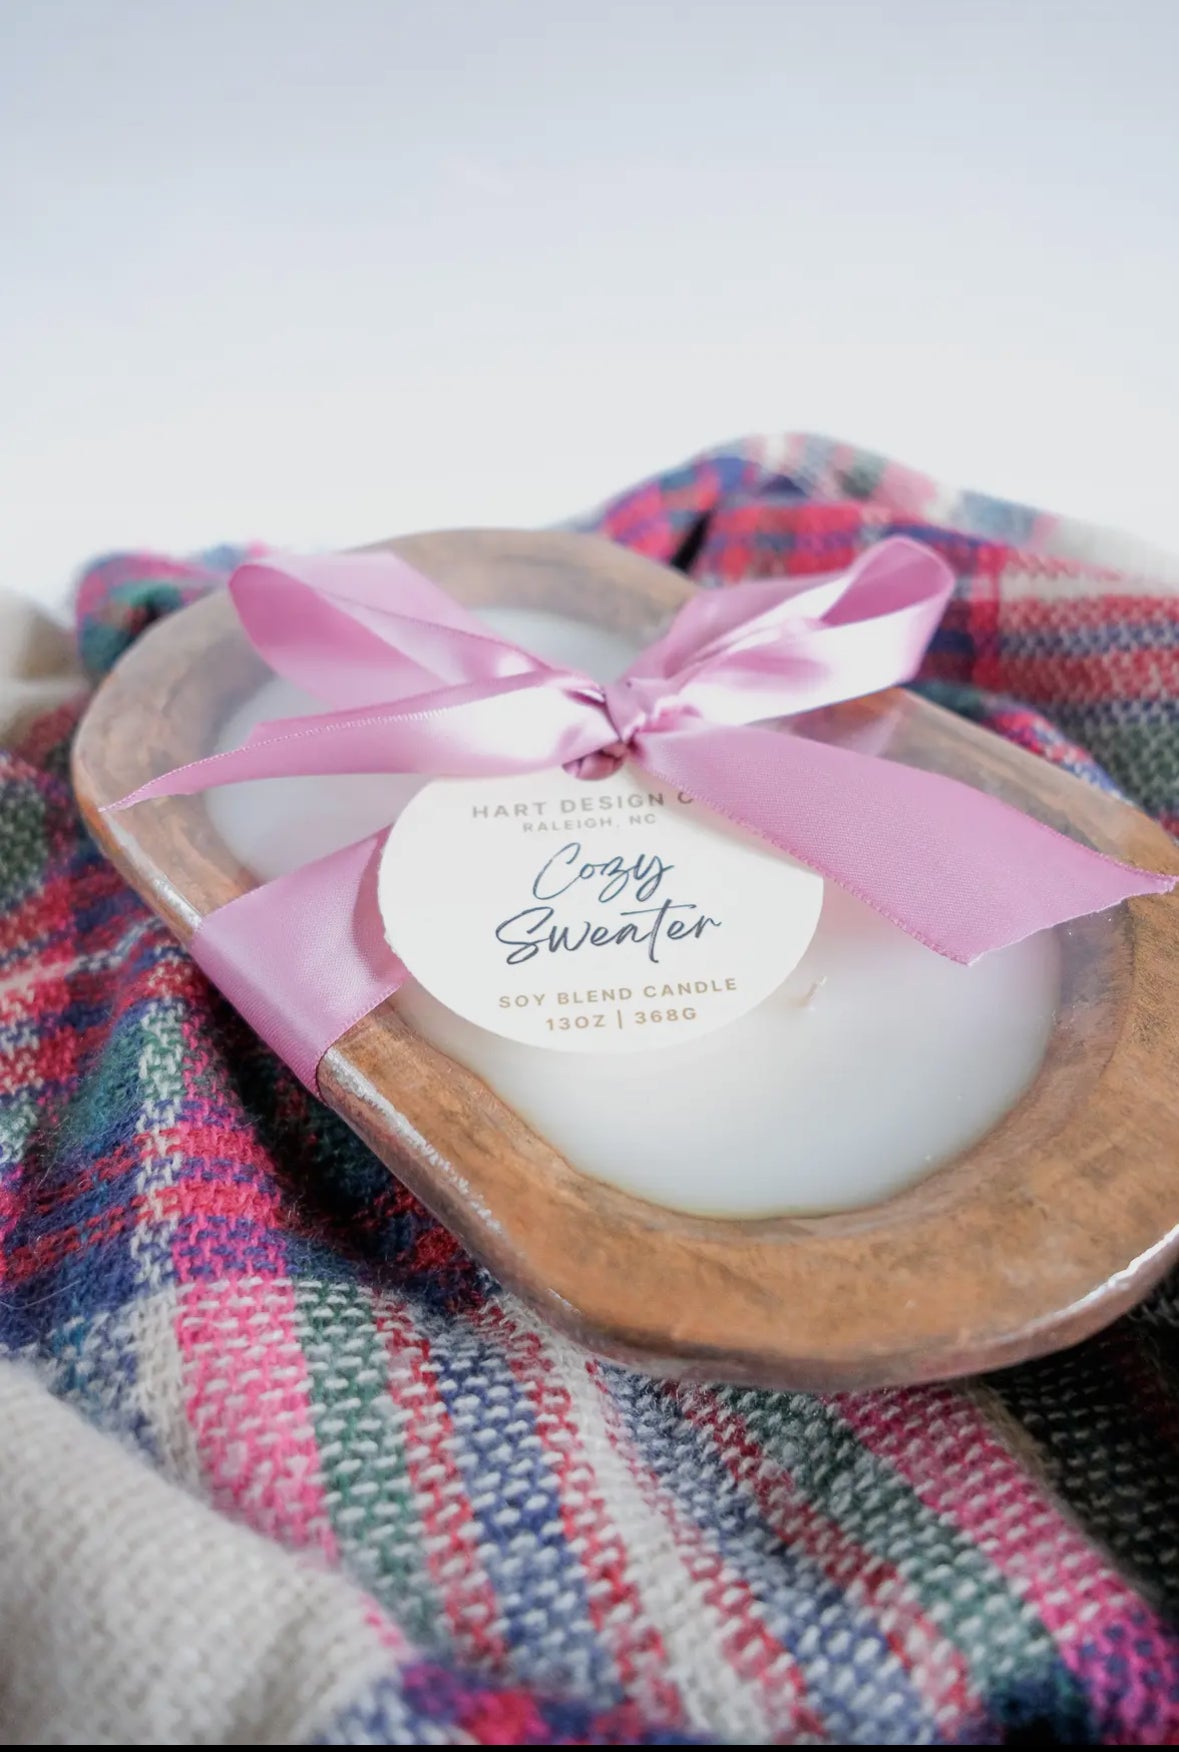 Candle - "Cozy Sweater Scent" - BEST SELLER Dough Bowl